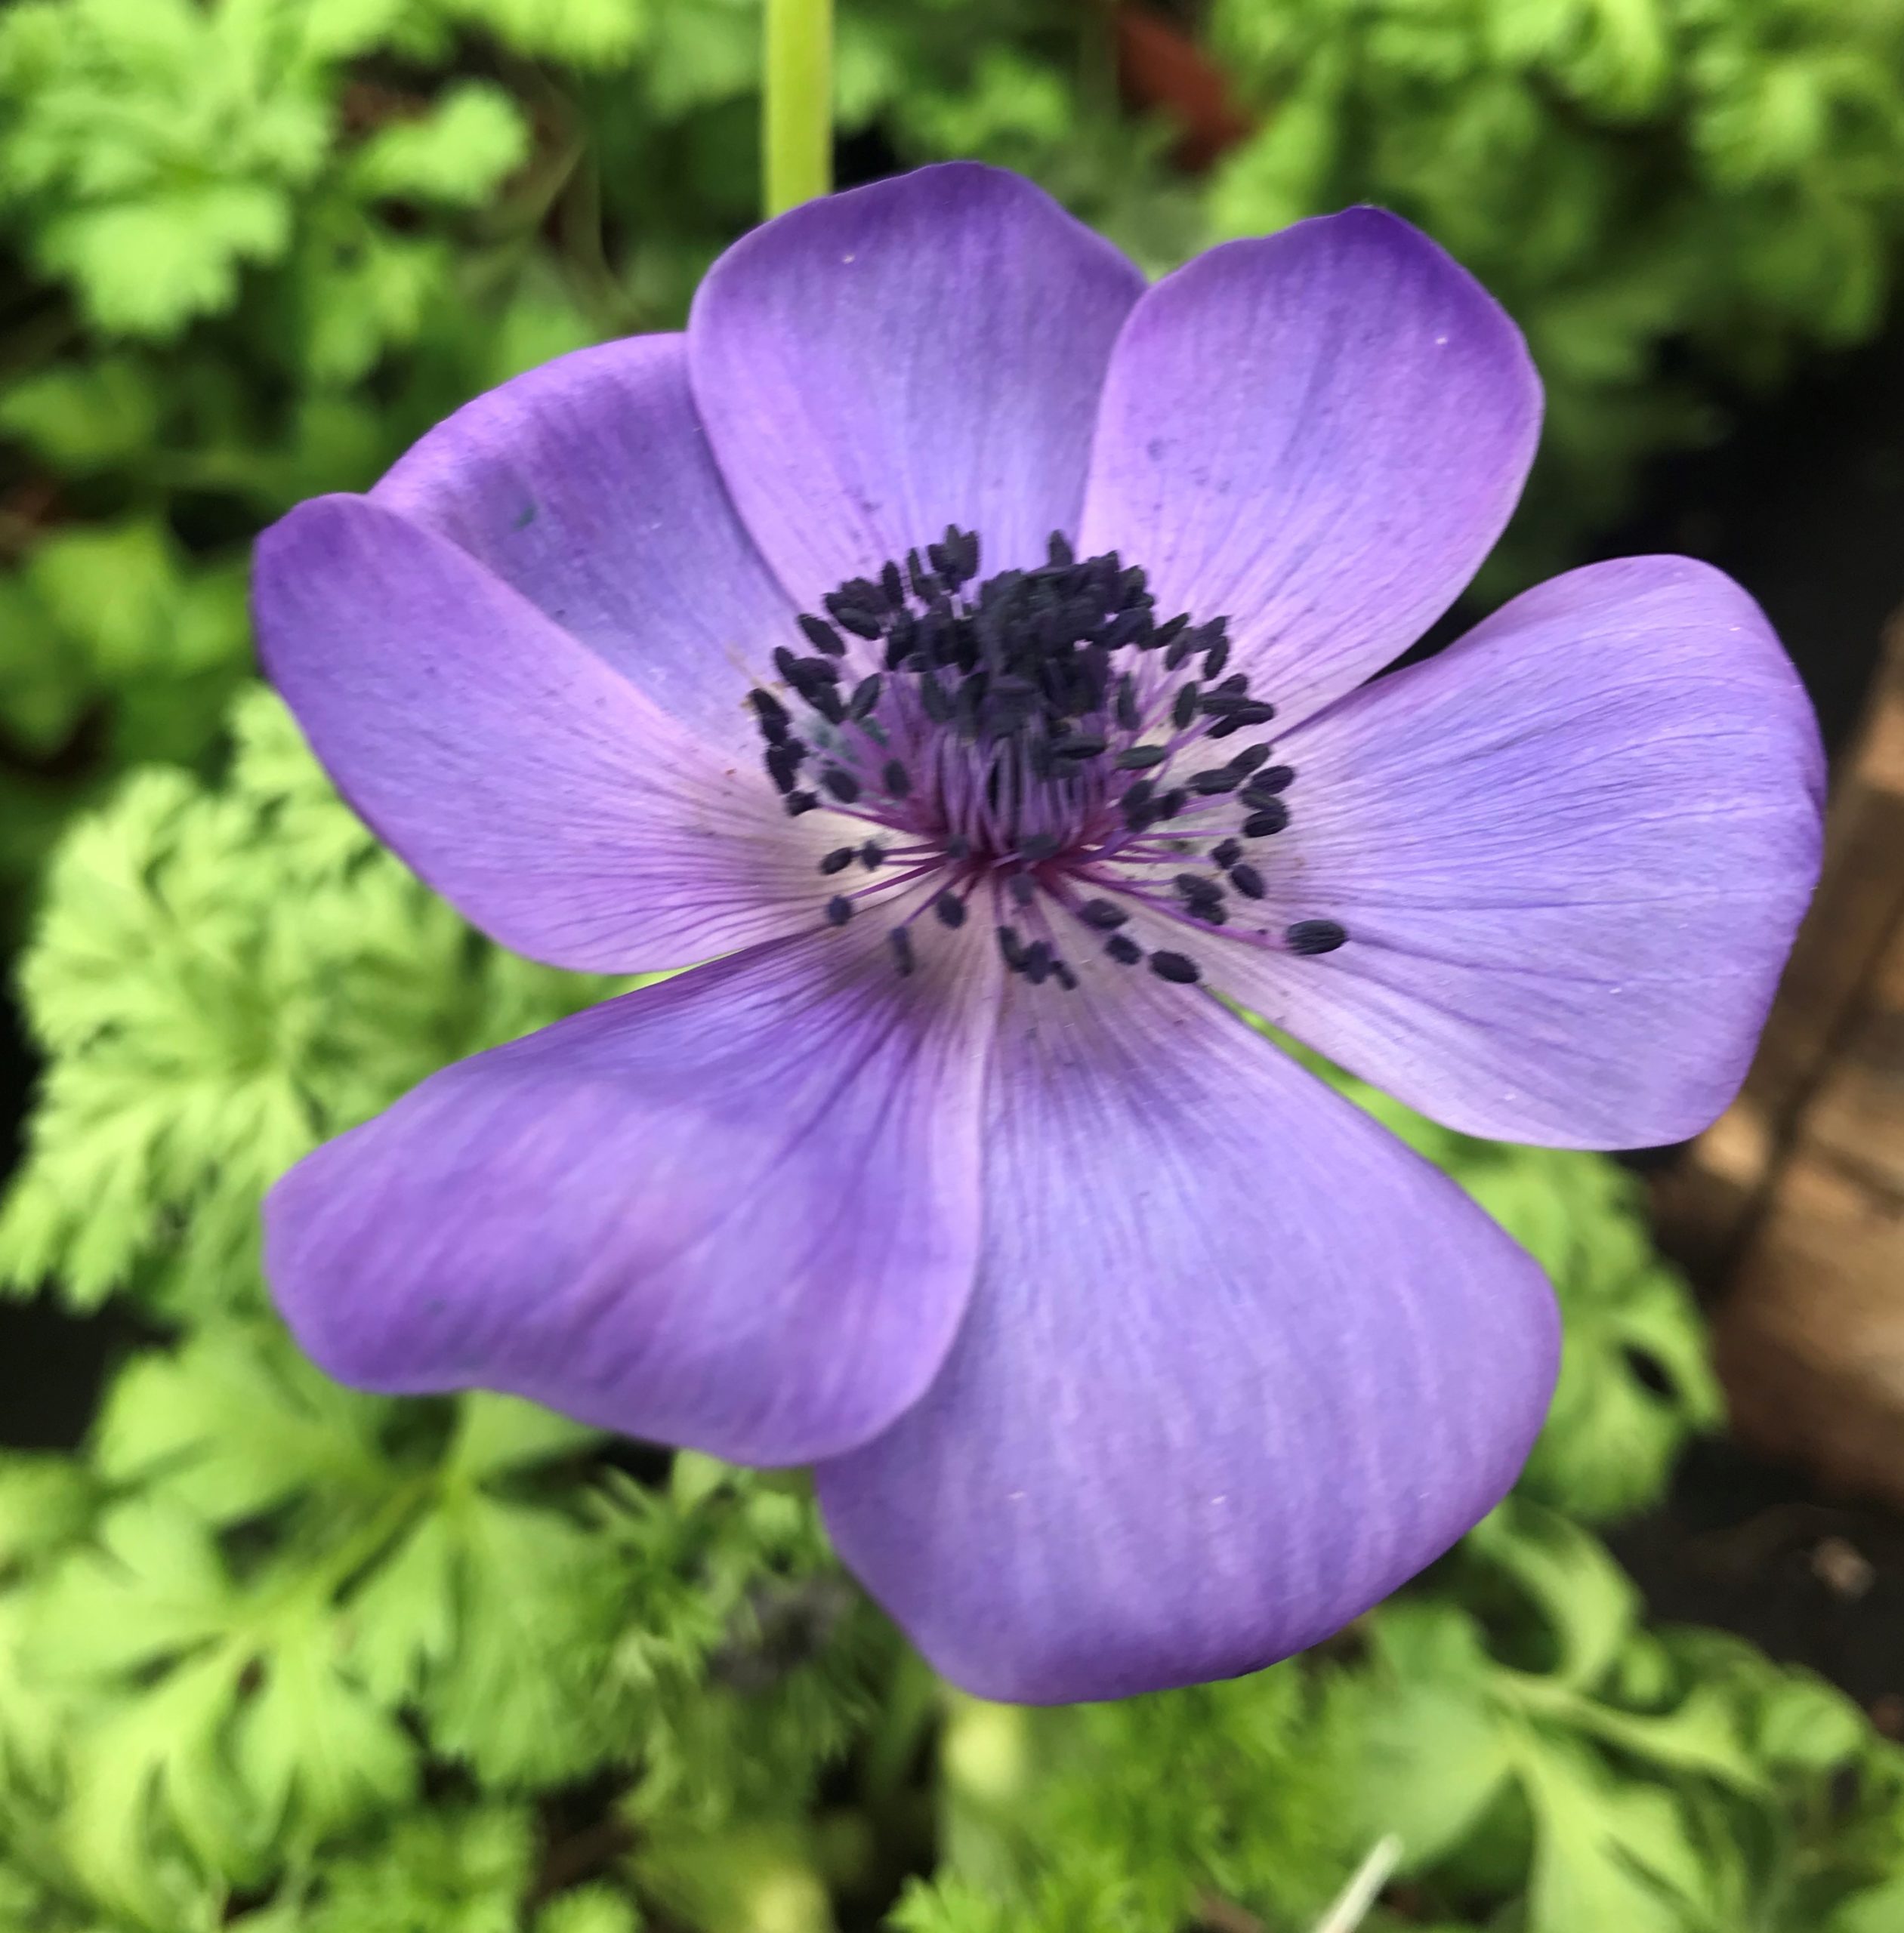 Anemone De Caen, ideal for the garden or containers, good cutflowers